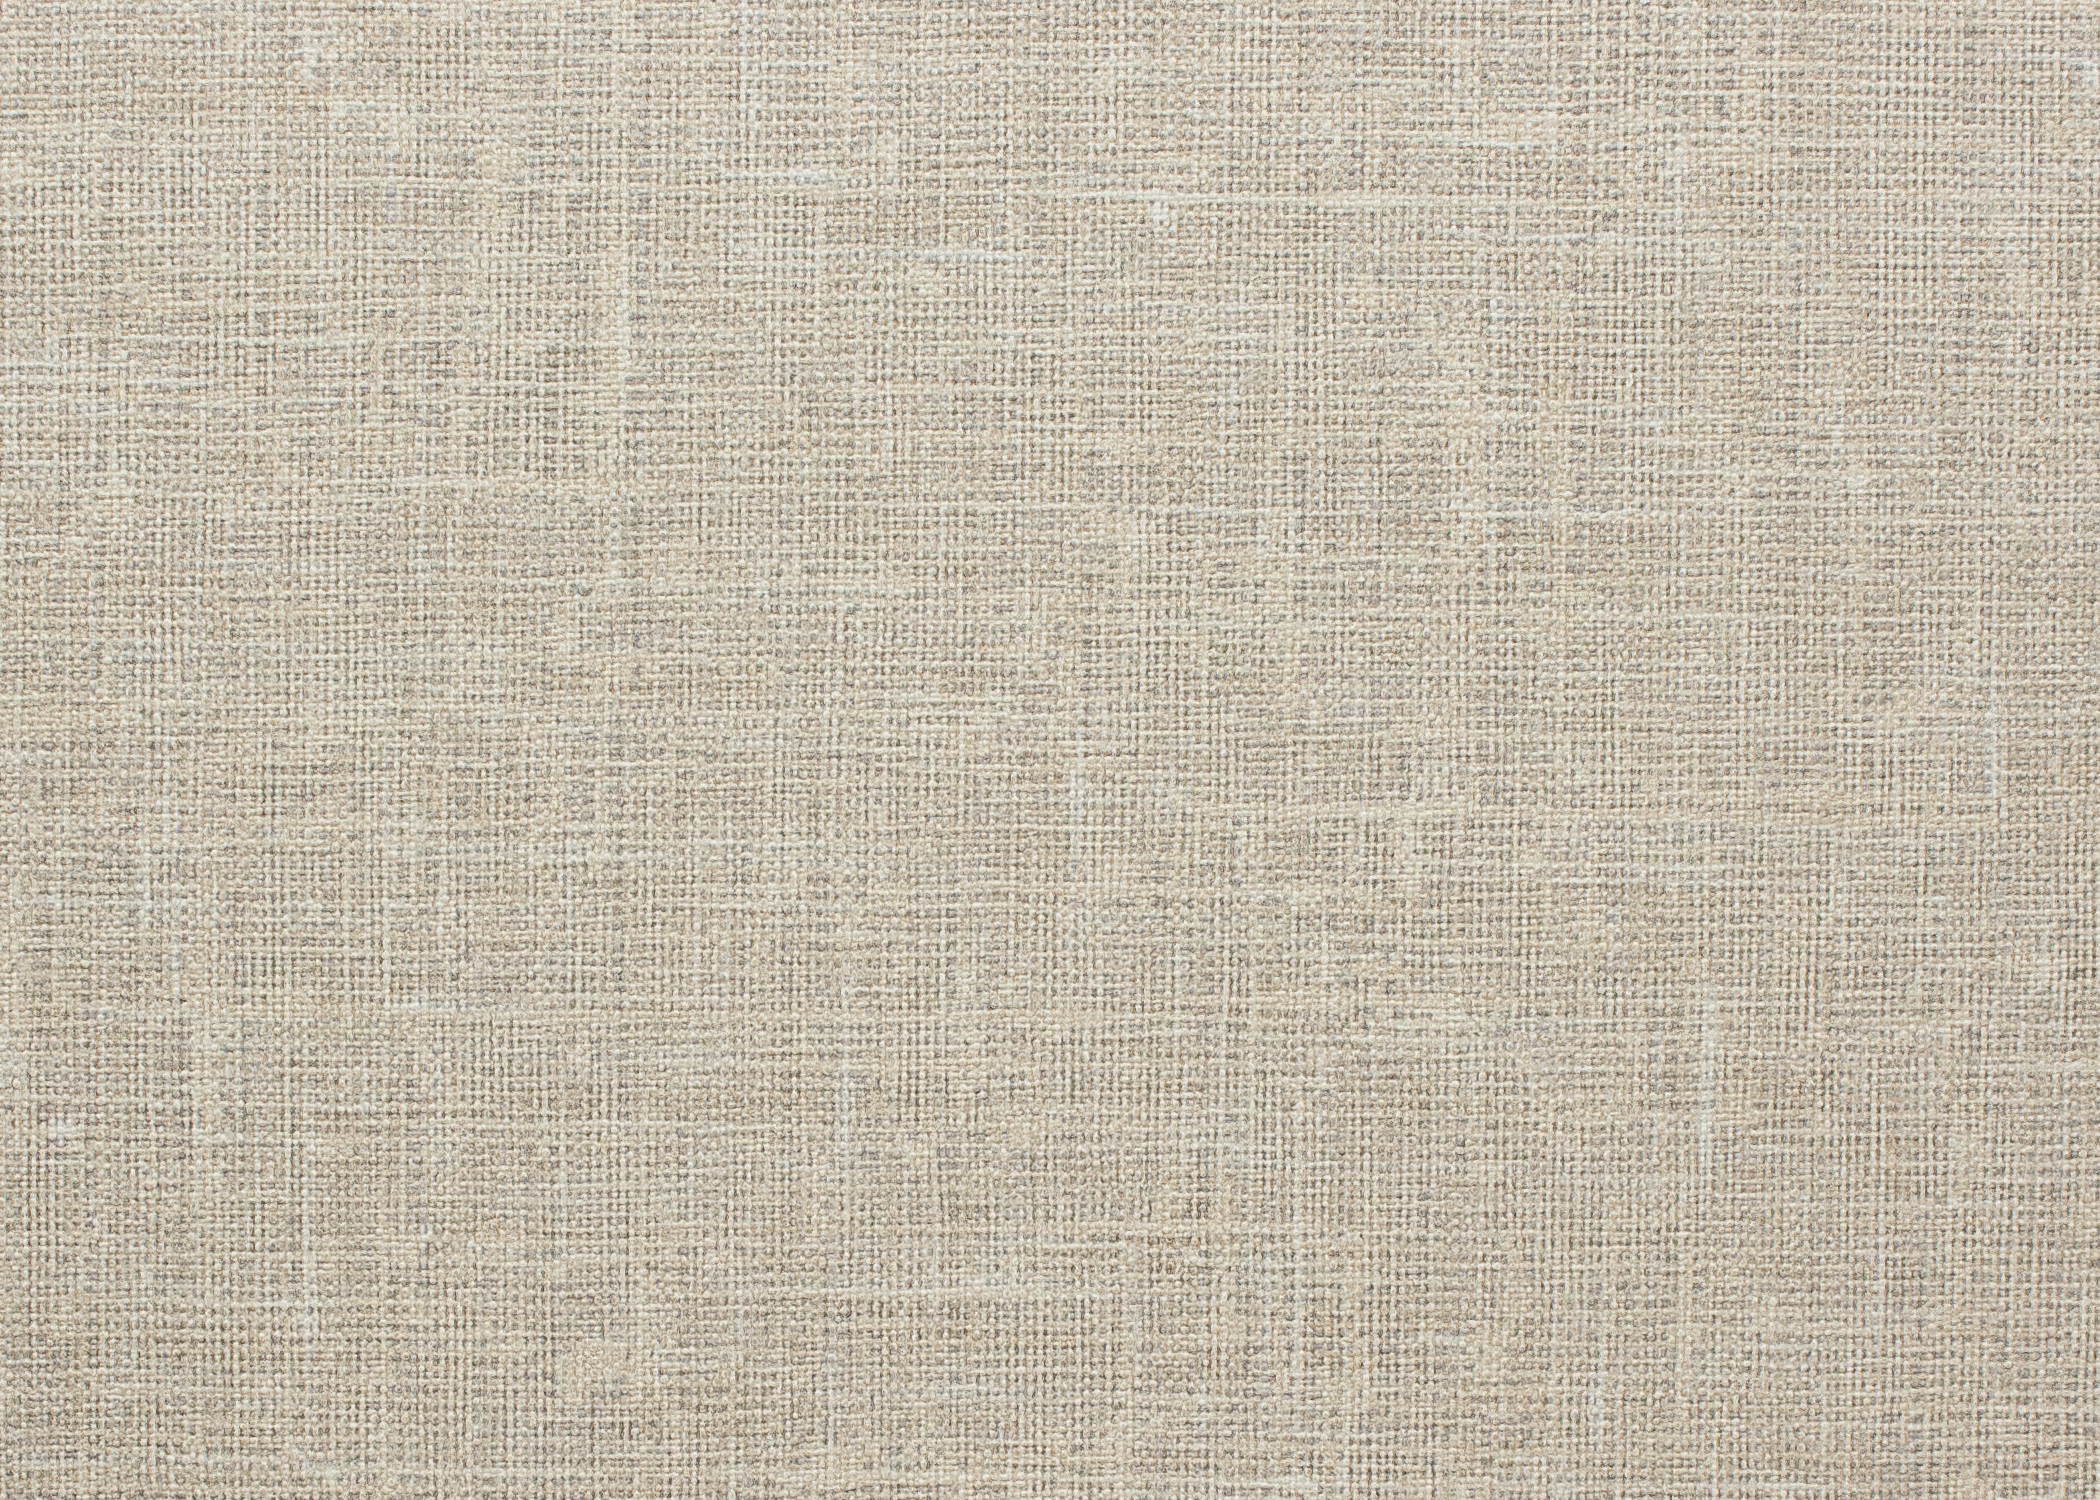 Roysons Wallcoverings Cheviot_8366_Comfy Beige